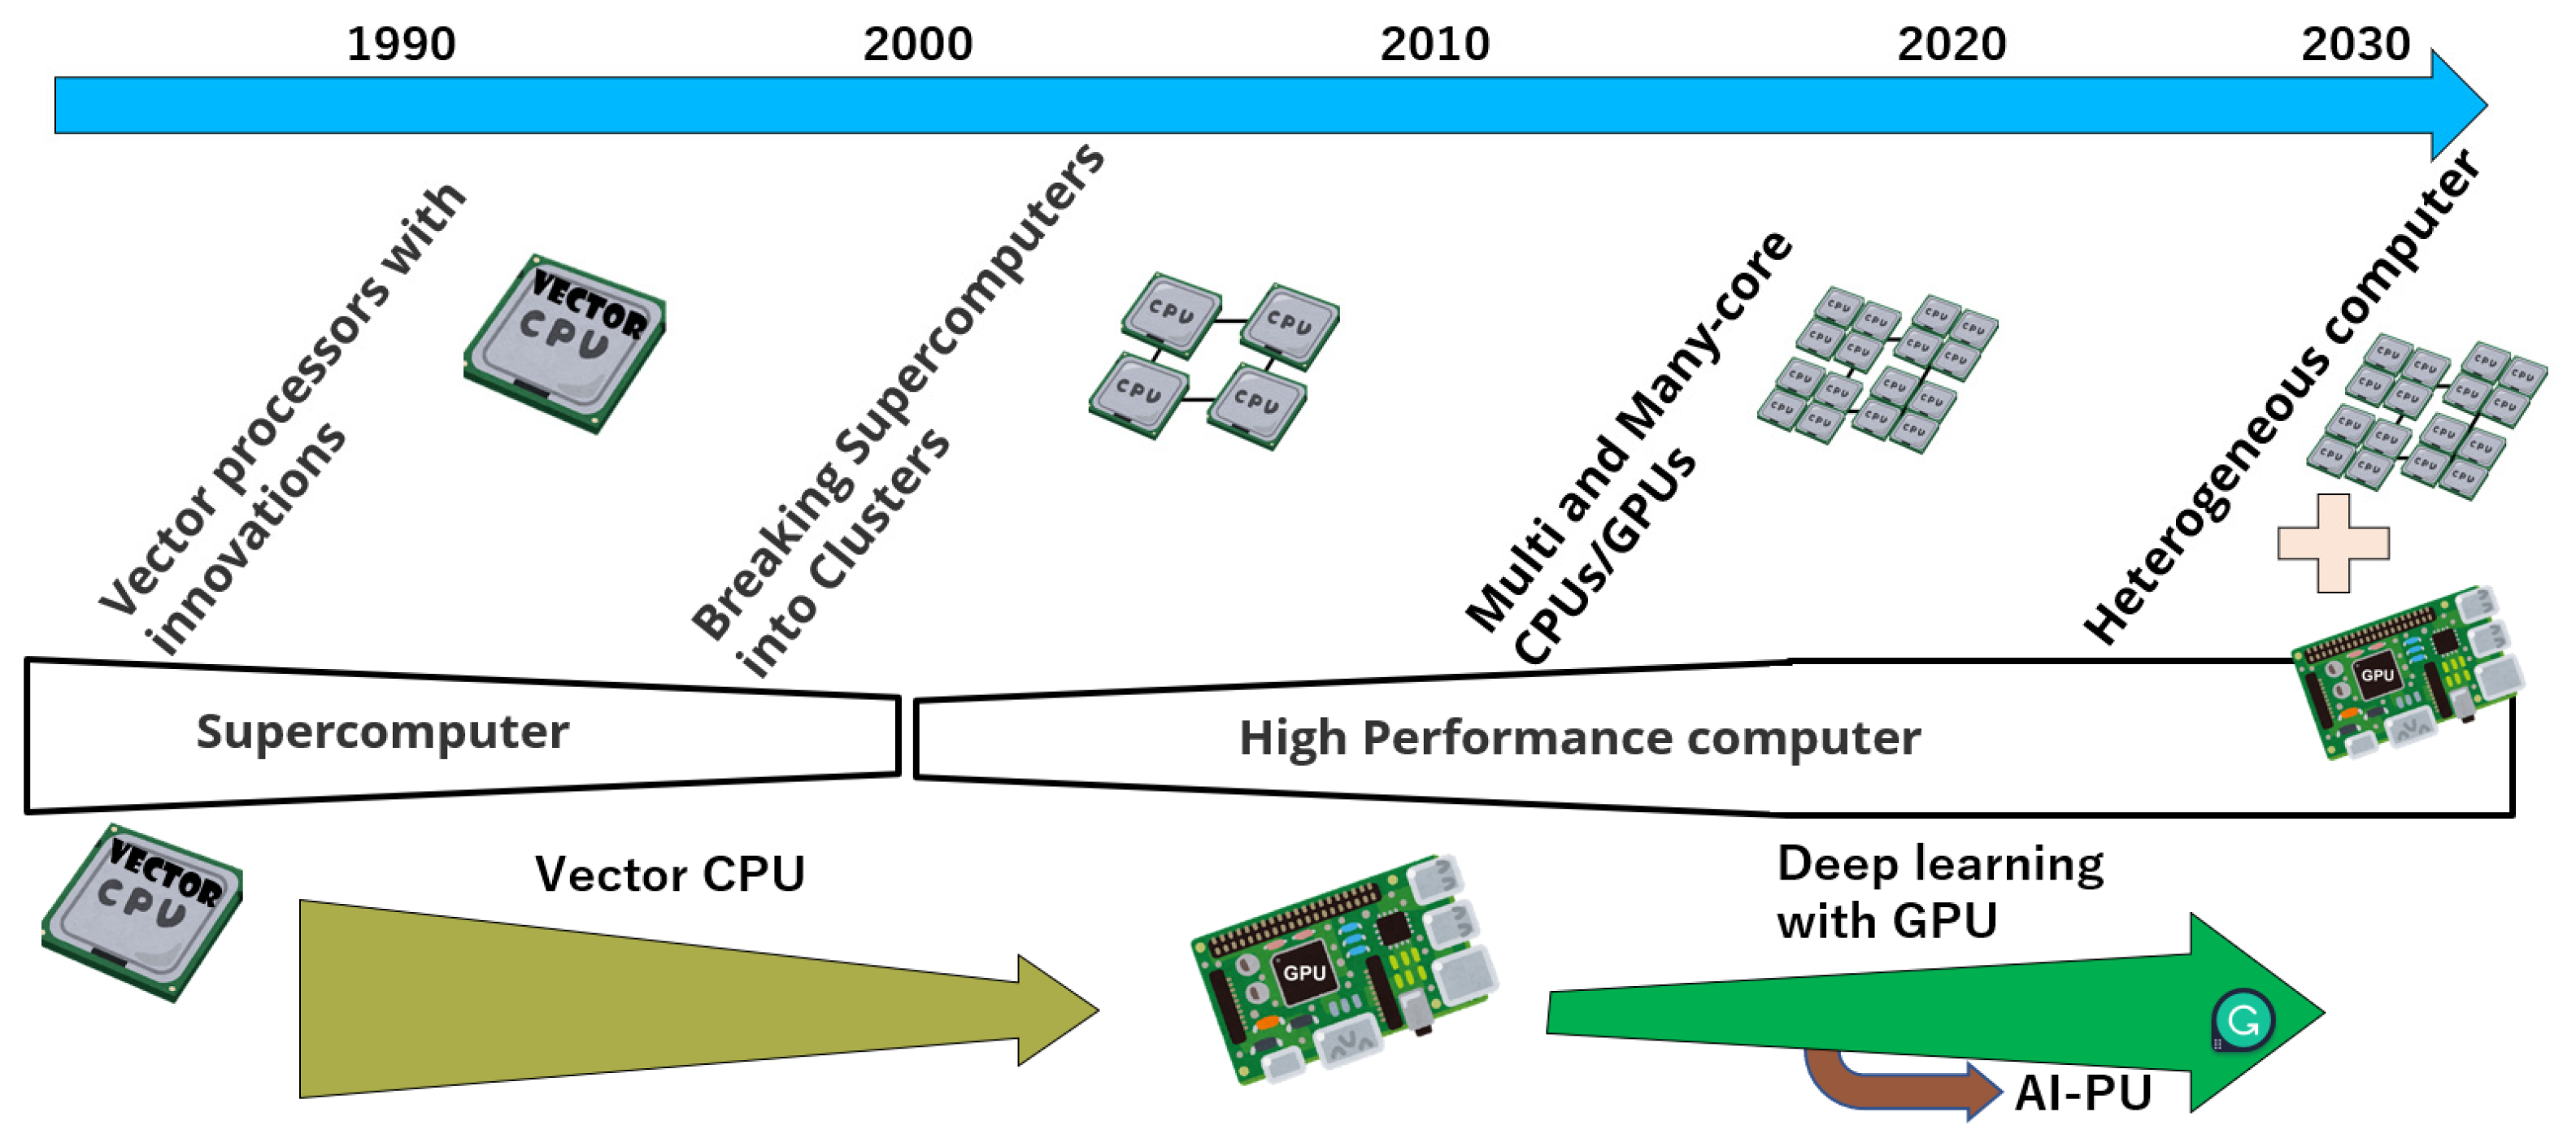 High-Performance Computing Data Center Cooling System Energy Efficiency, Computational Science